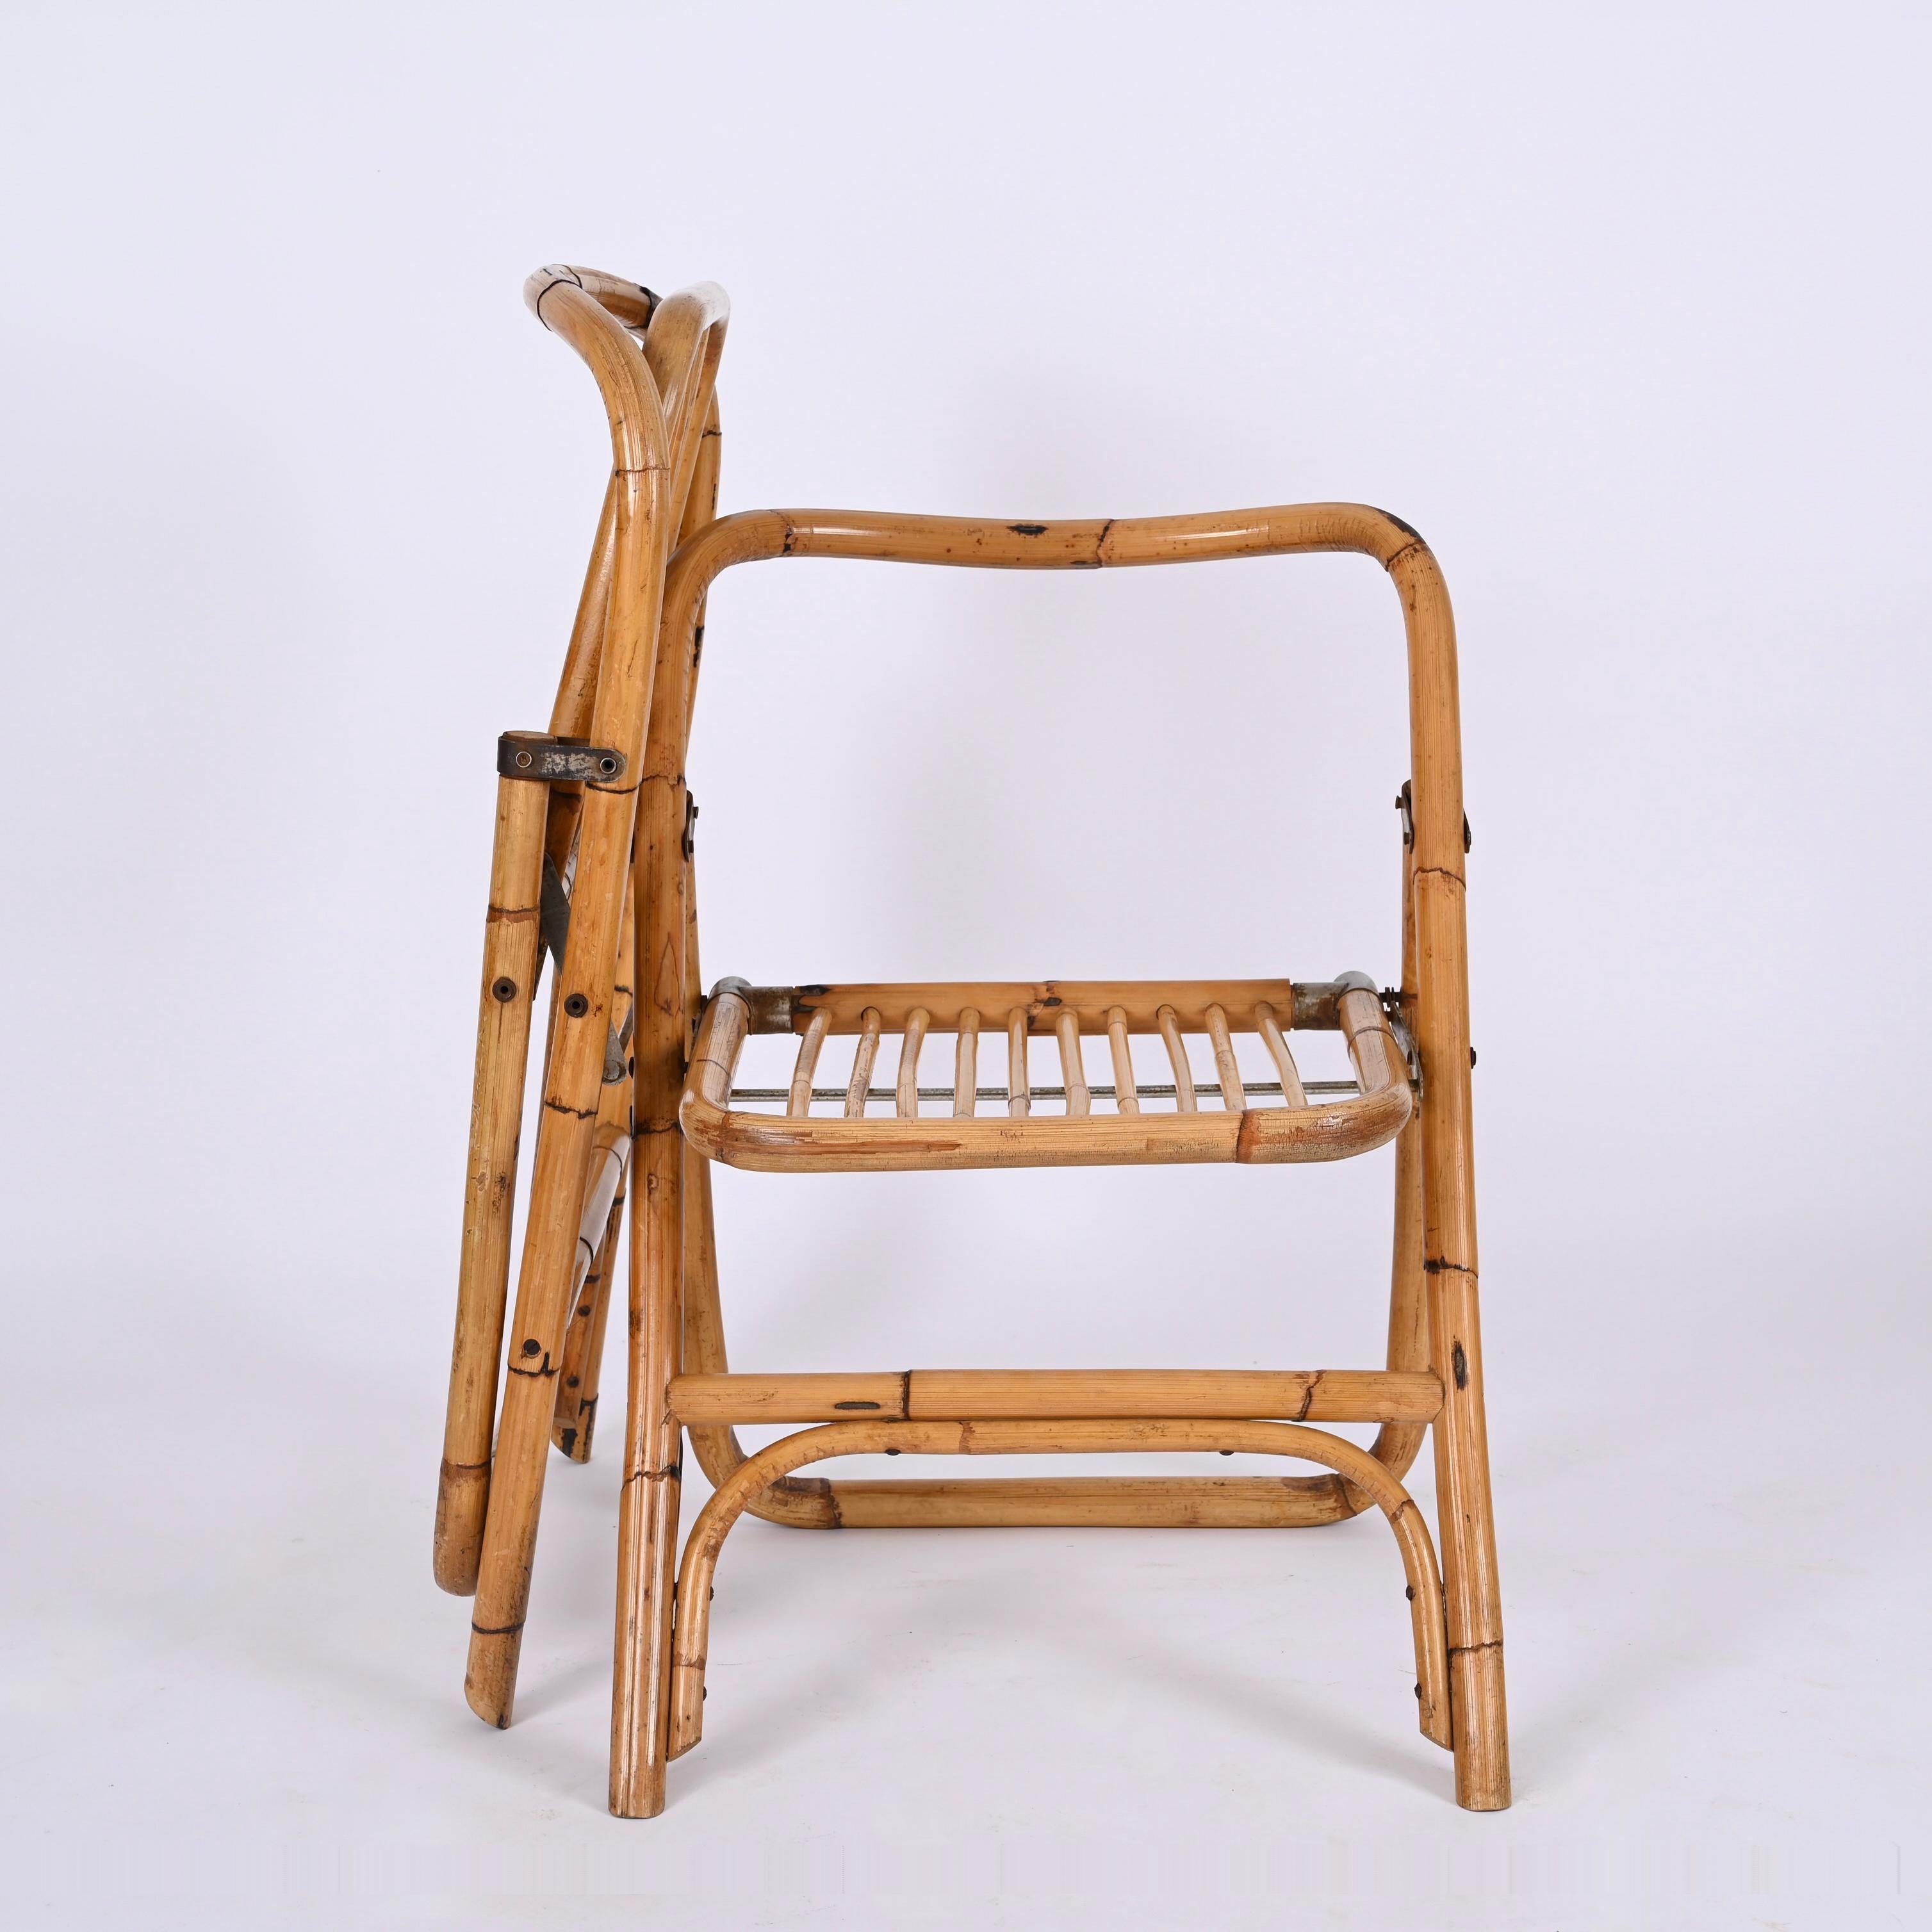 Dal Vera Bamboo Folding Chairs, Italy, 1960s For Sale 2